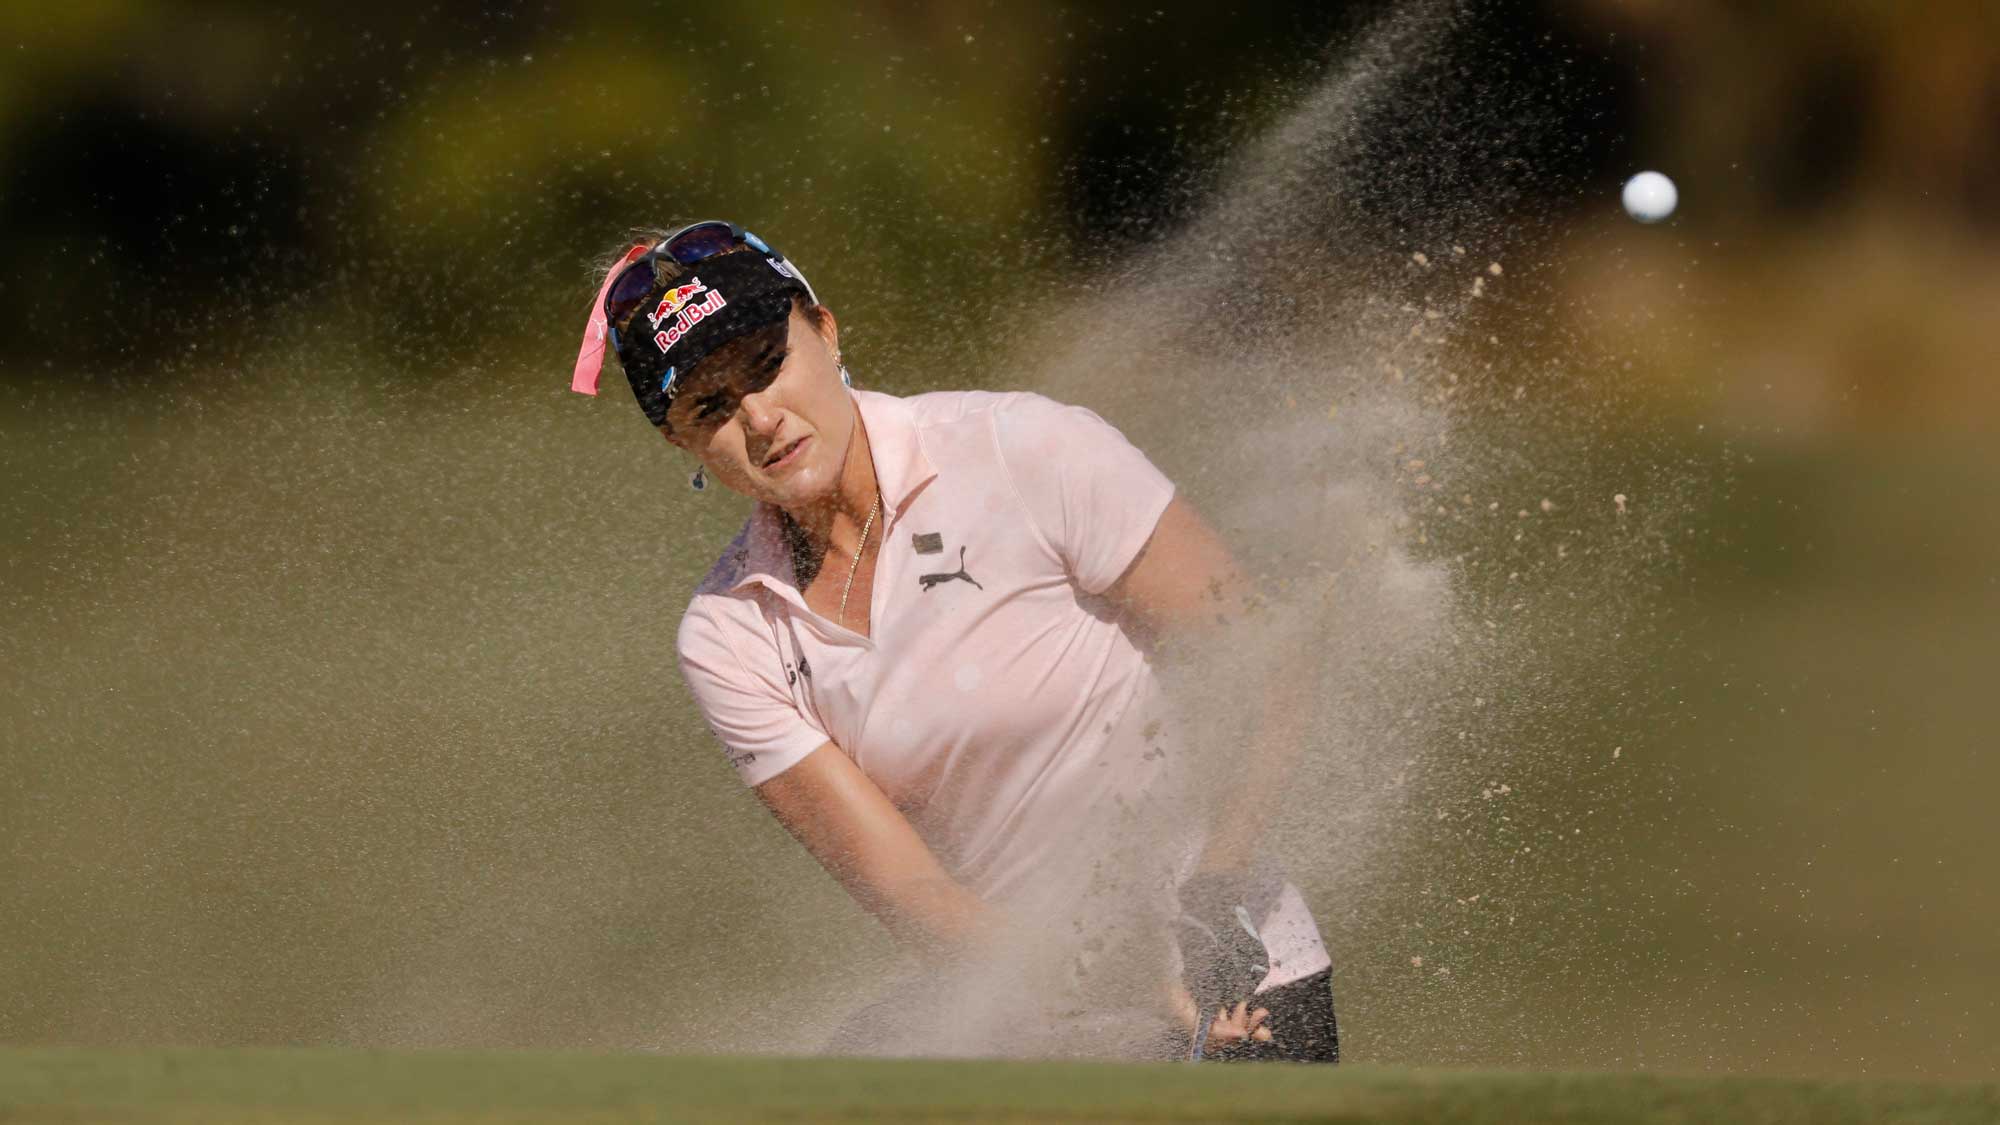 Lexi Thompson of the United States plays a shot from a bunker on the ninth hole during the third round of the CME Group Tour Championship